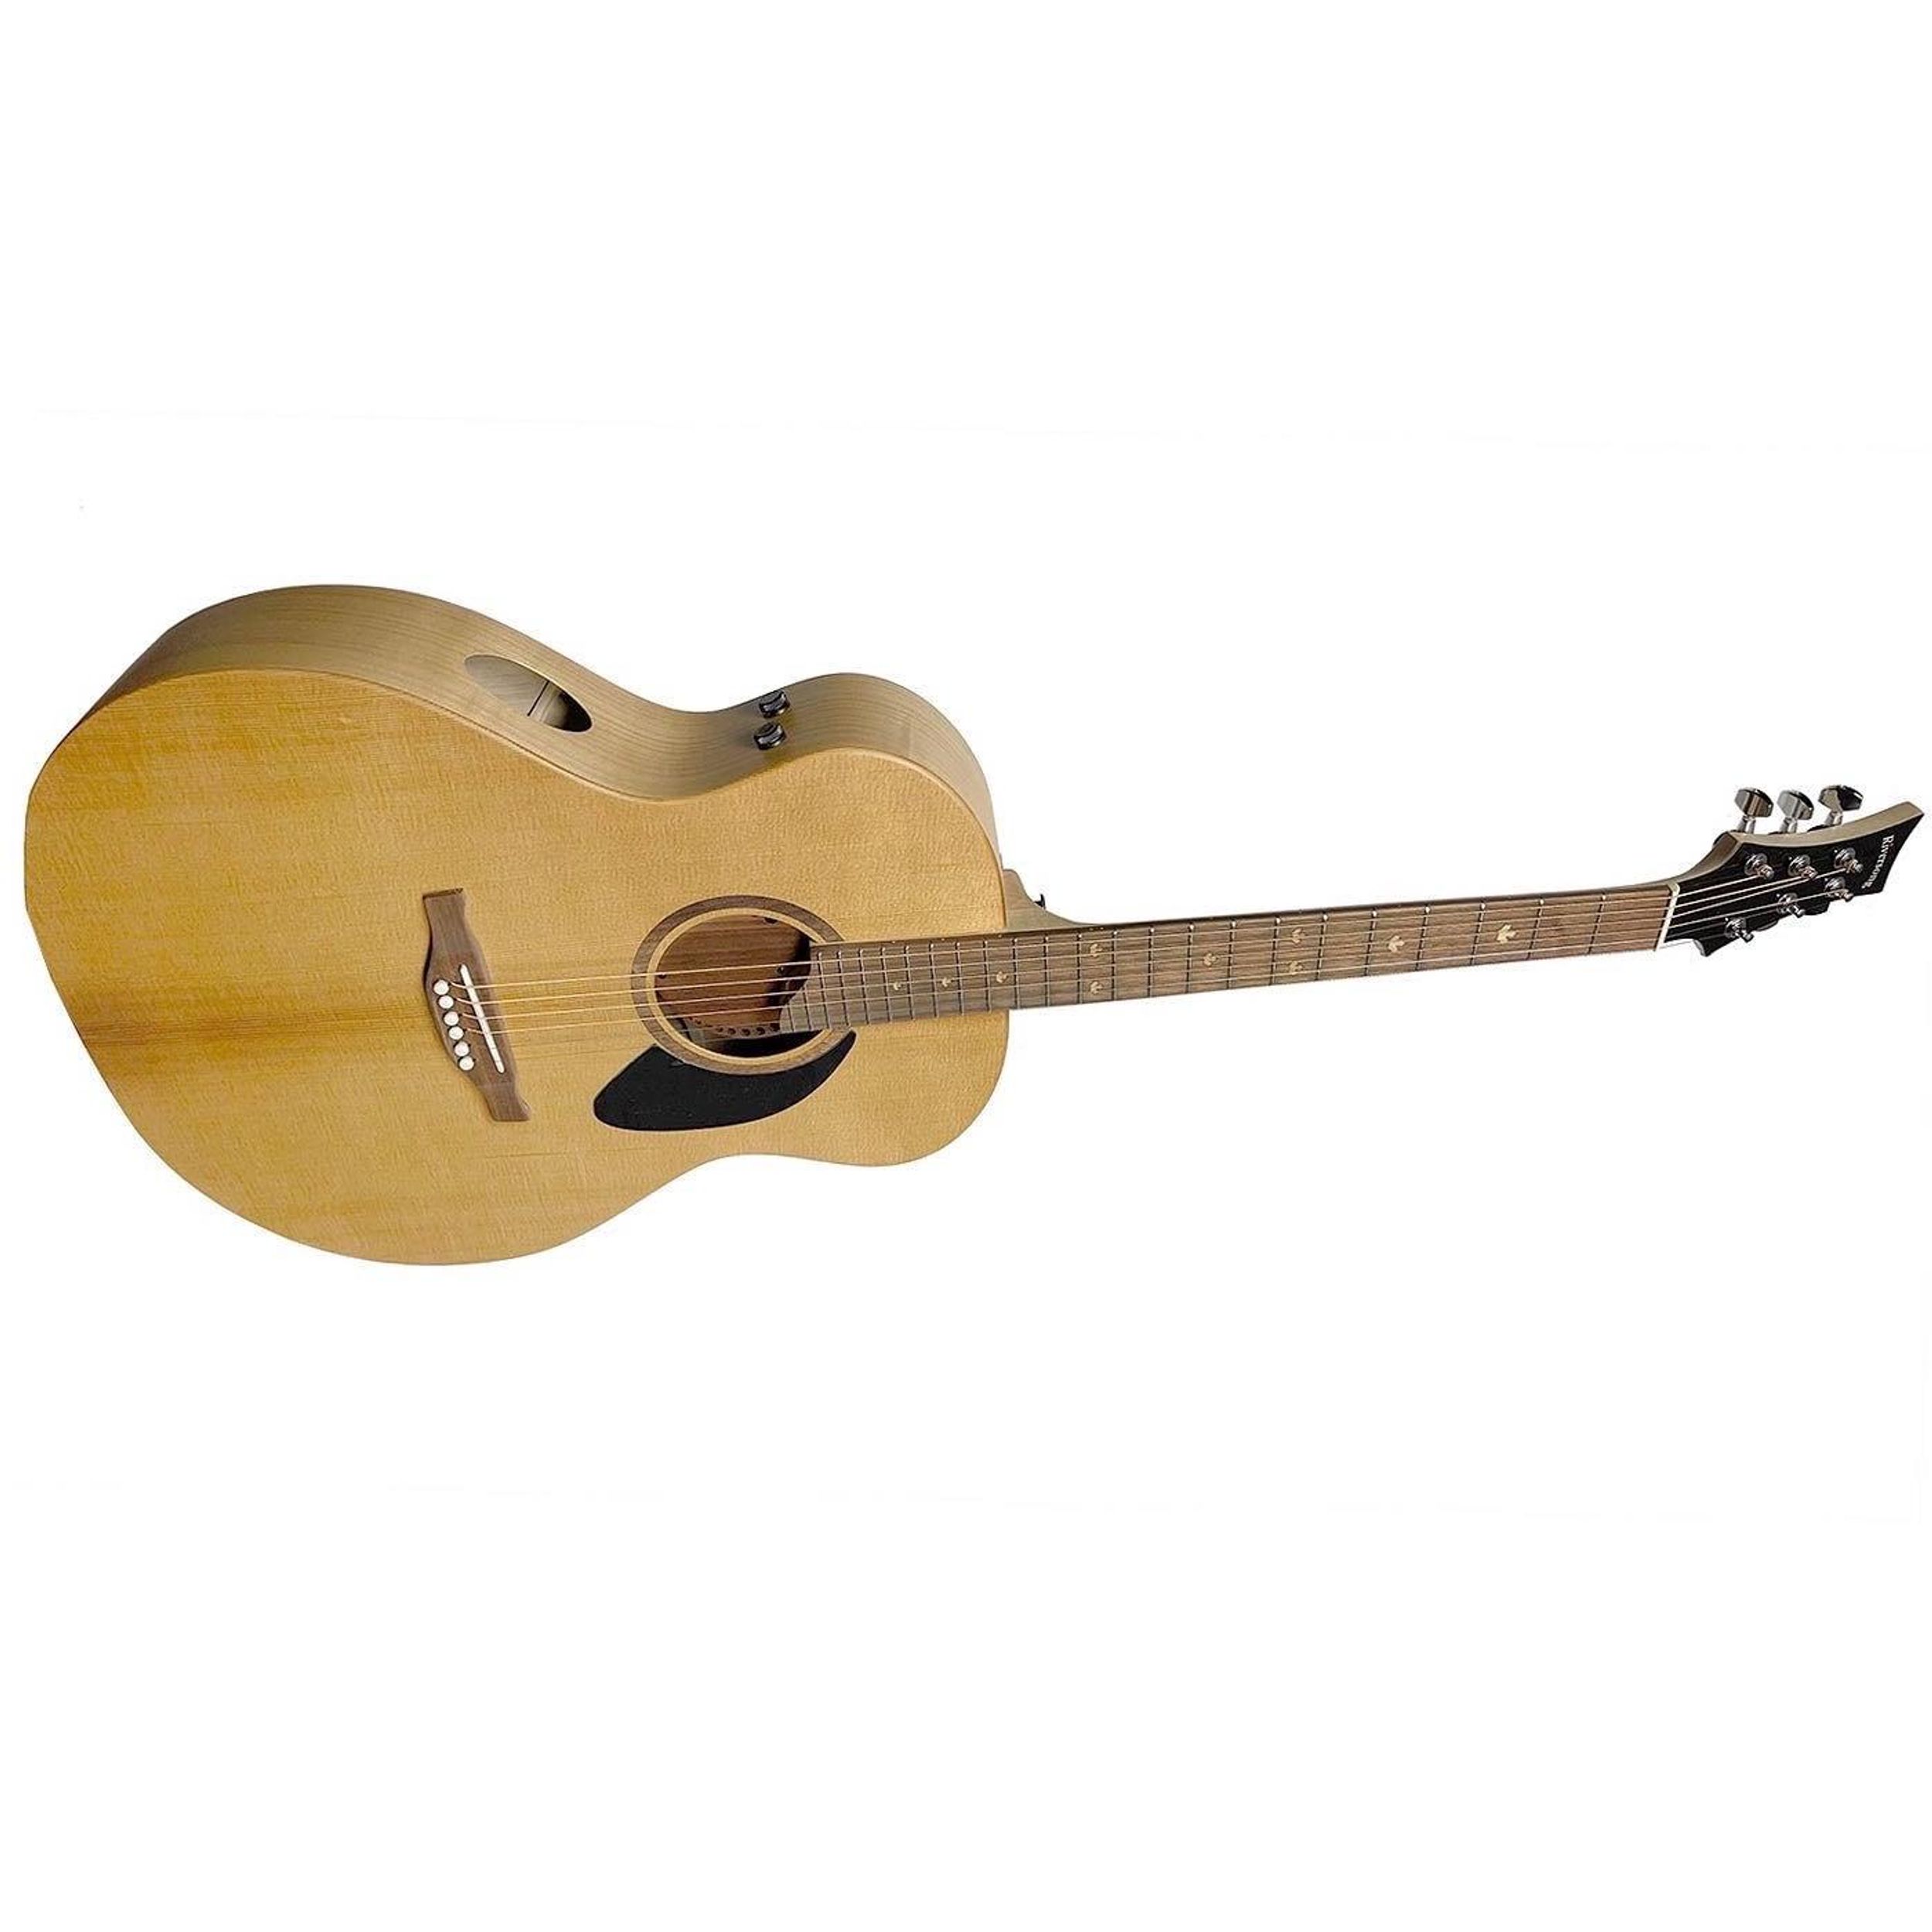 Riversong Guitars Launches the Glennwood TS6 Acoustic Electric